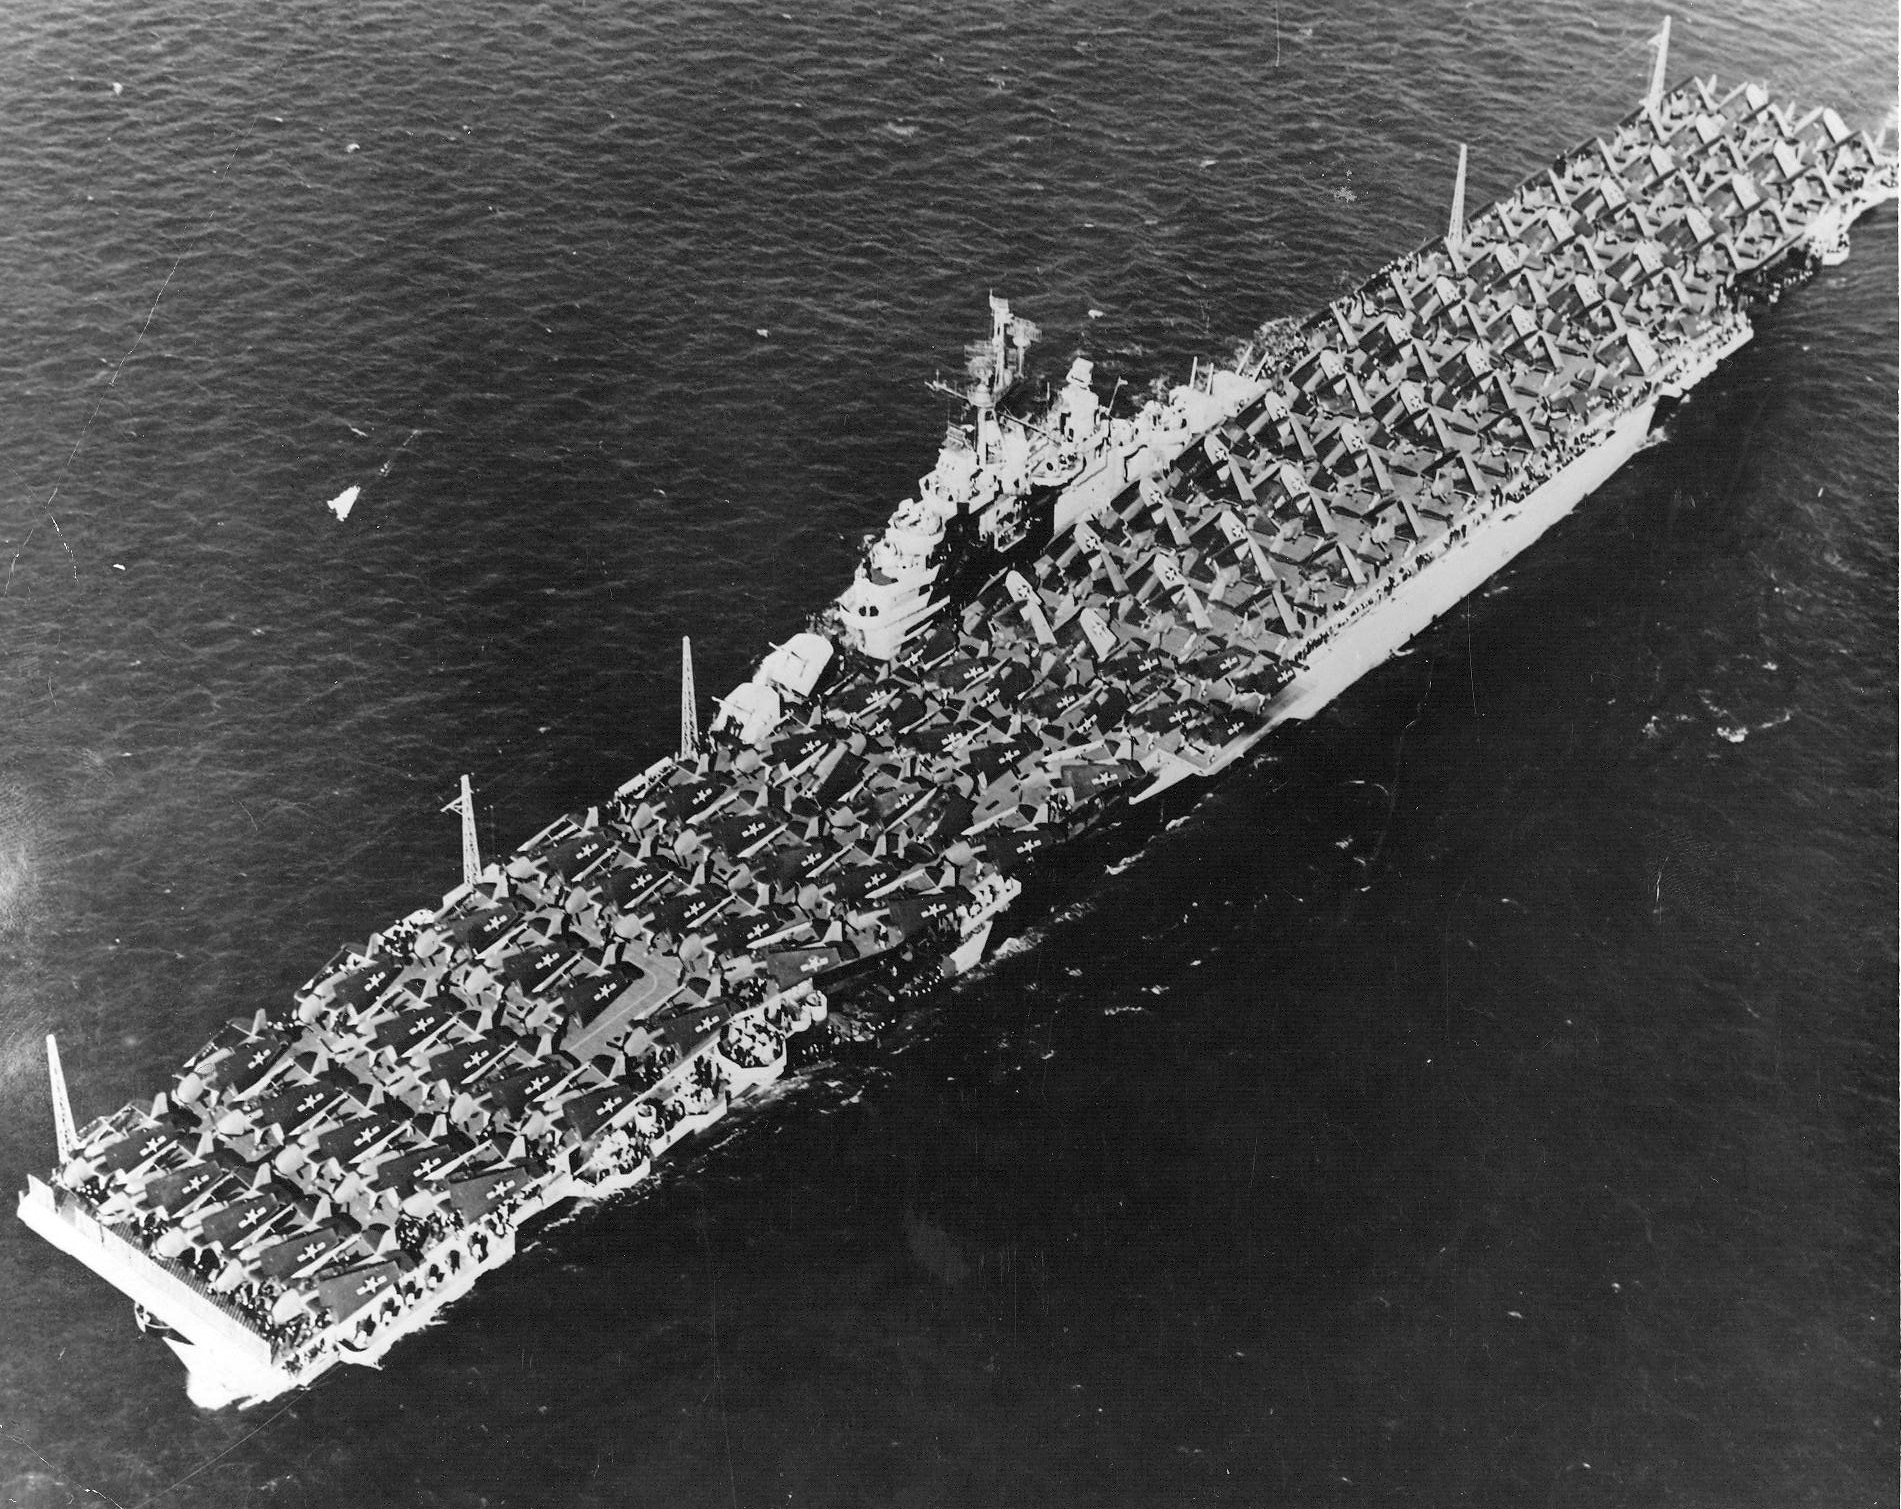 USS Essex departing San Francisco Naval Shipyard, California, United States, 15 Apr 1944, photo 4 of 4; note camouflage measure 32 design 6/10D